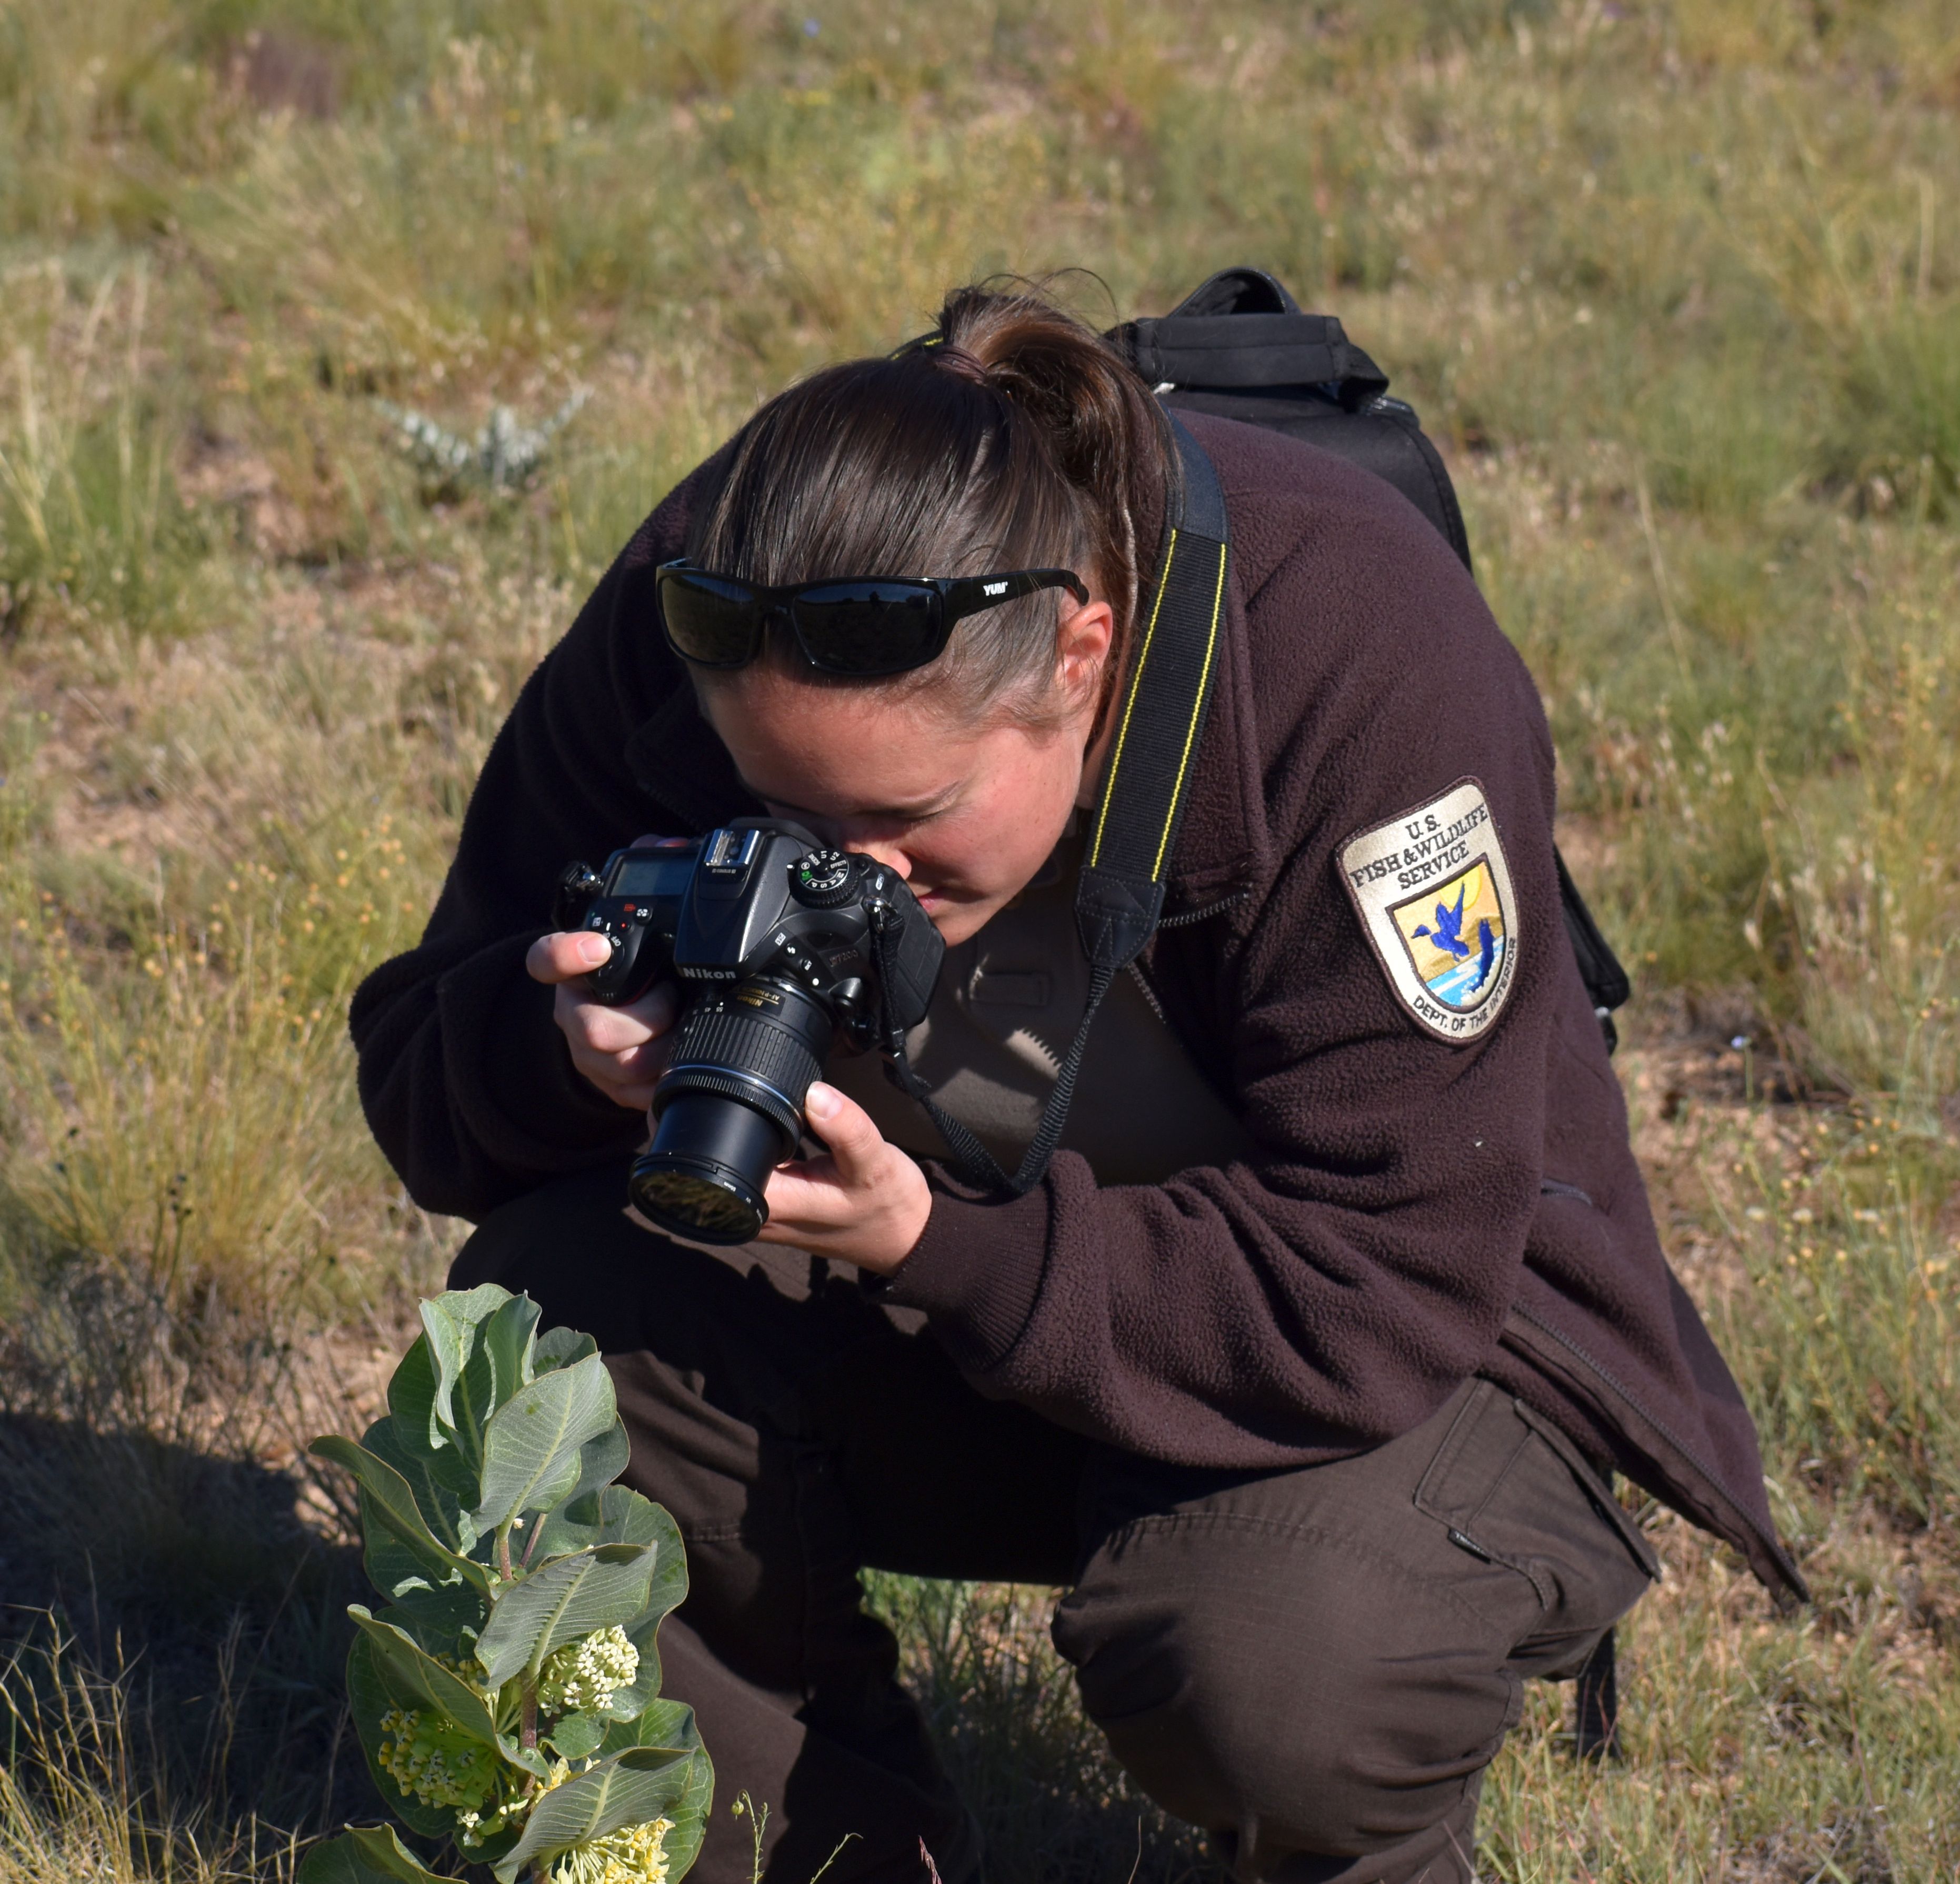 A woman wearing her U.S. Fish and Wildlife Service uniform stooping down to take a close-up photo of a plant